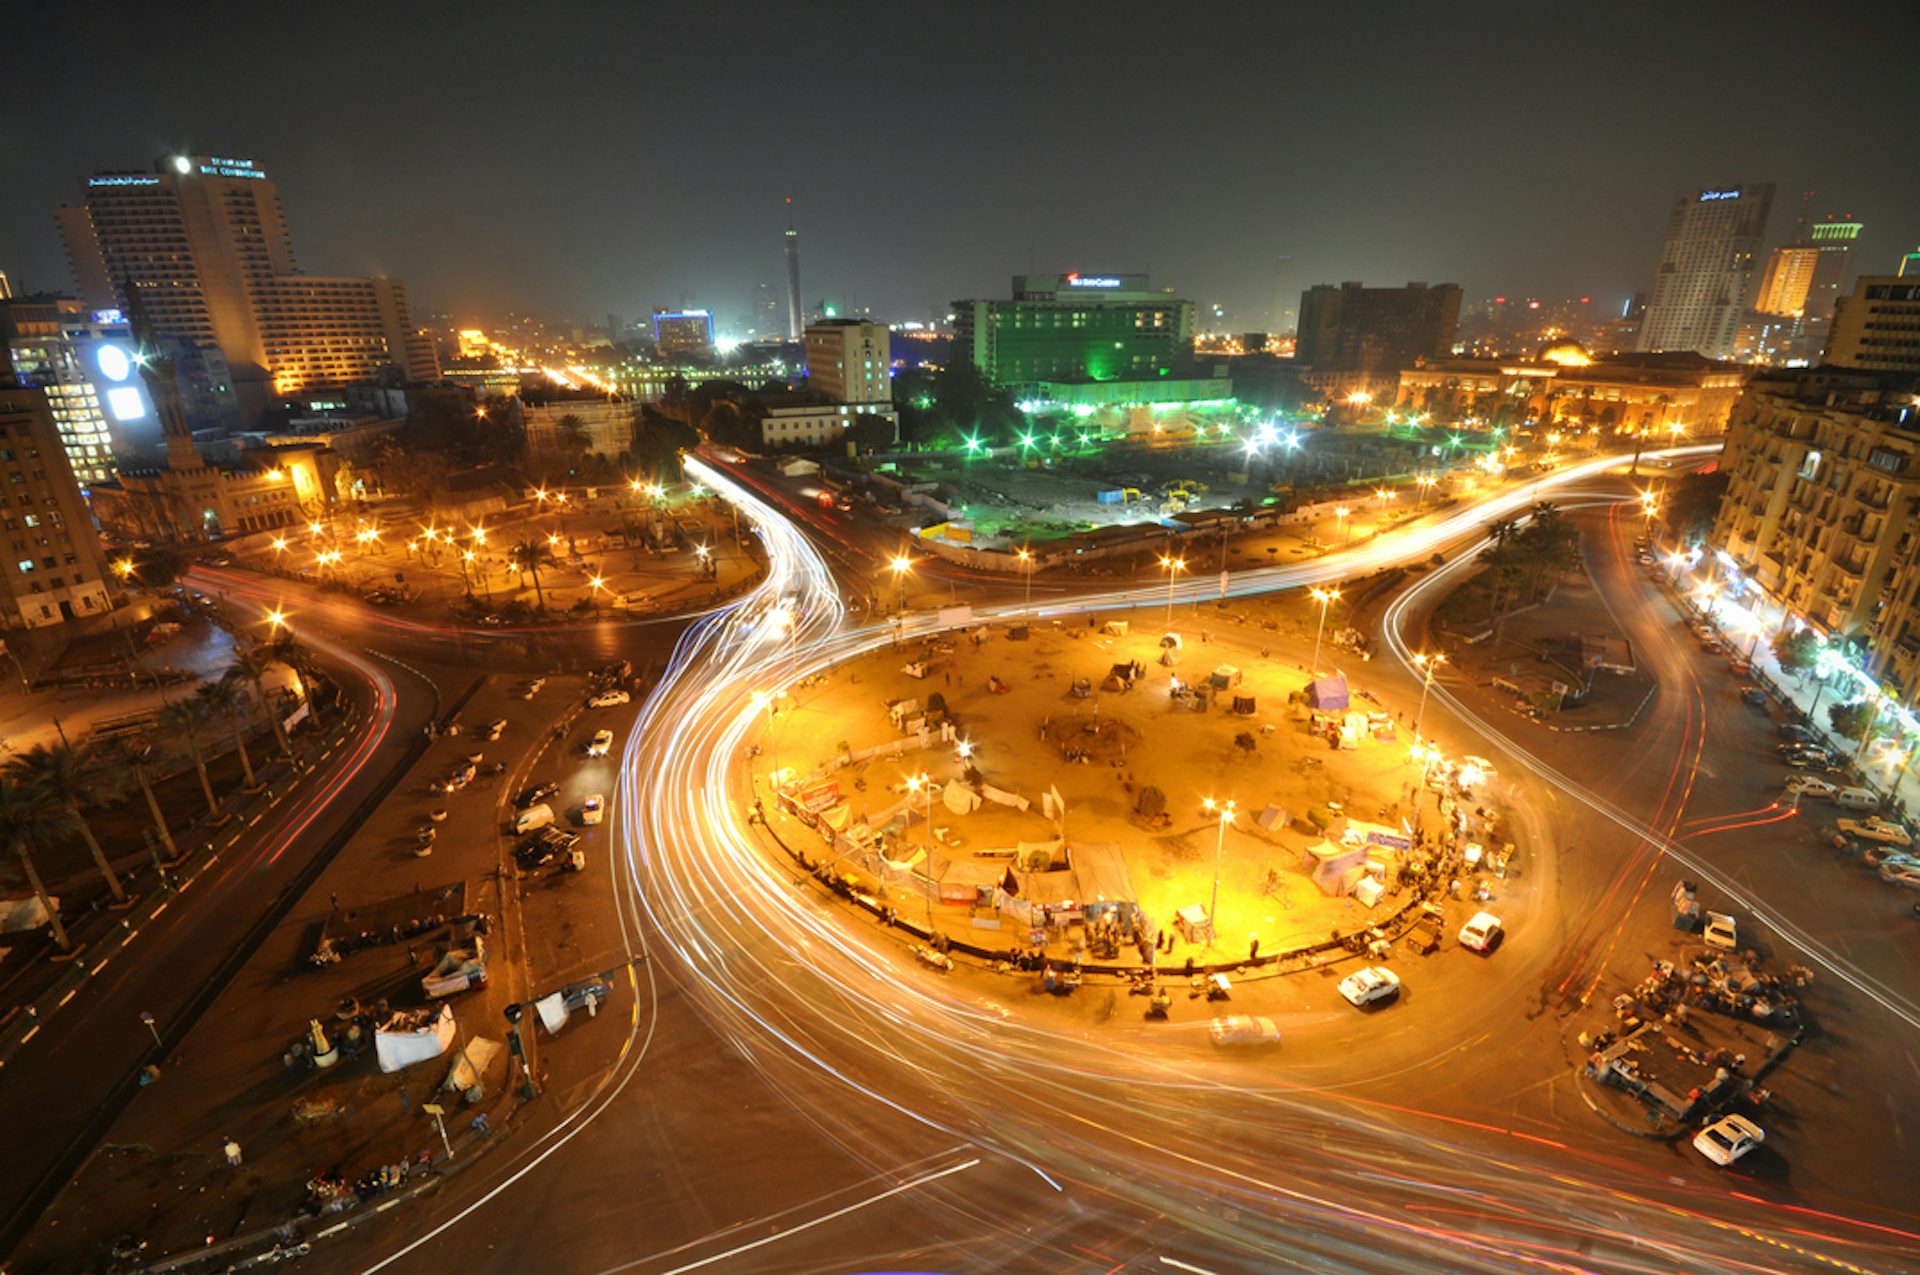 A shot of a large roundabout in the city at dusk–as if taken from a tall building—illuminated in gold light by car headlamps